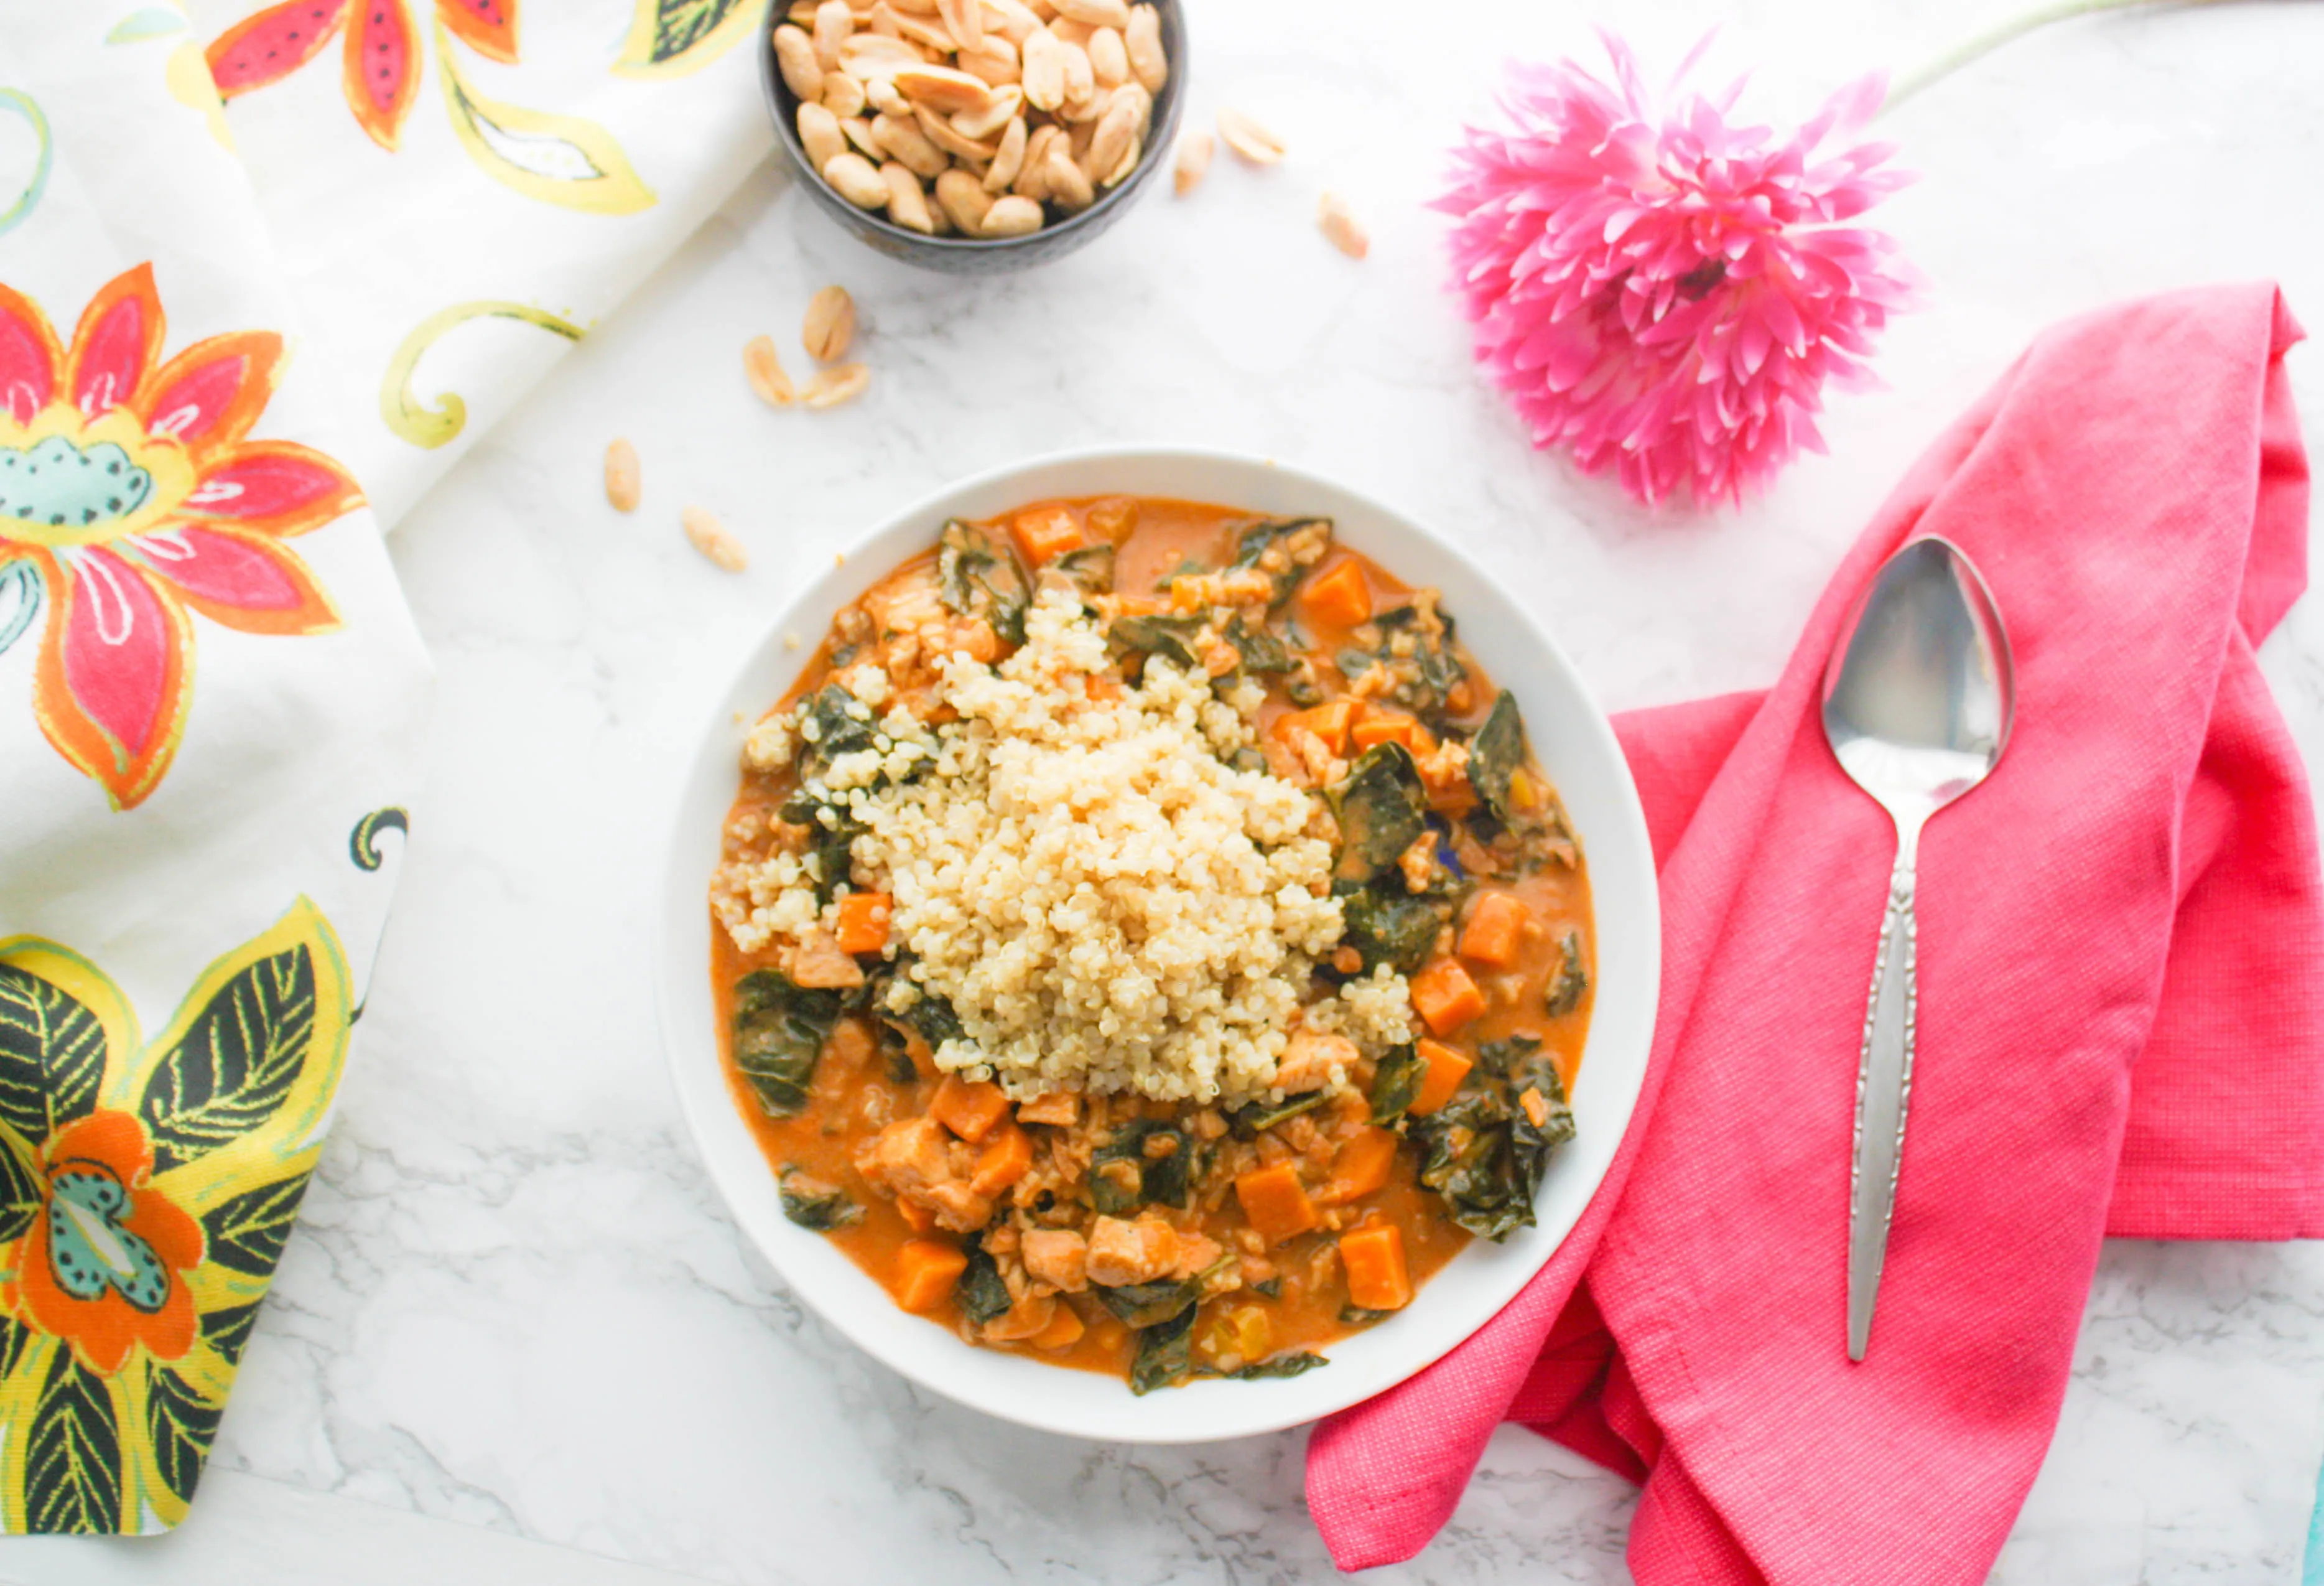 West African Peanut Stew is a delightful dish for dinner. You'll love West African Peanut Stew for the flavor and color!